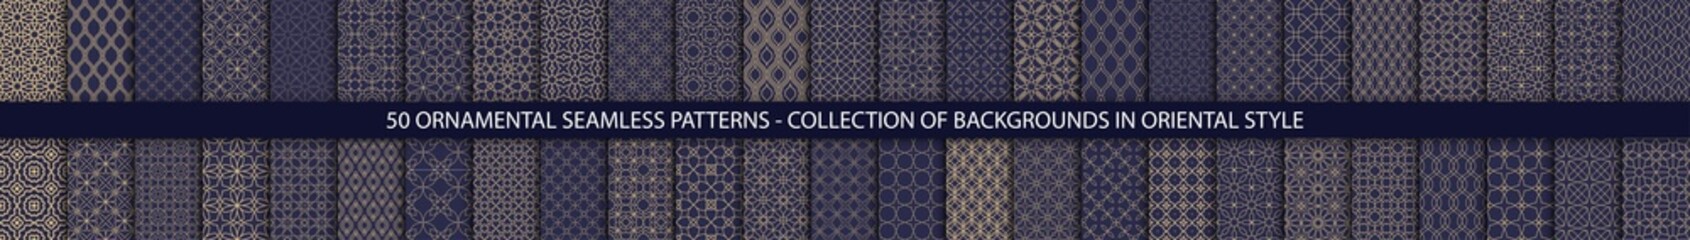 Super Big set of 50 oriental patterns. Dark blue and gold background with Arabic ornaments. Patterns, backgrounds and wallpapers for your design. Textile ornament. Vector illustration.